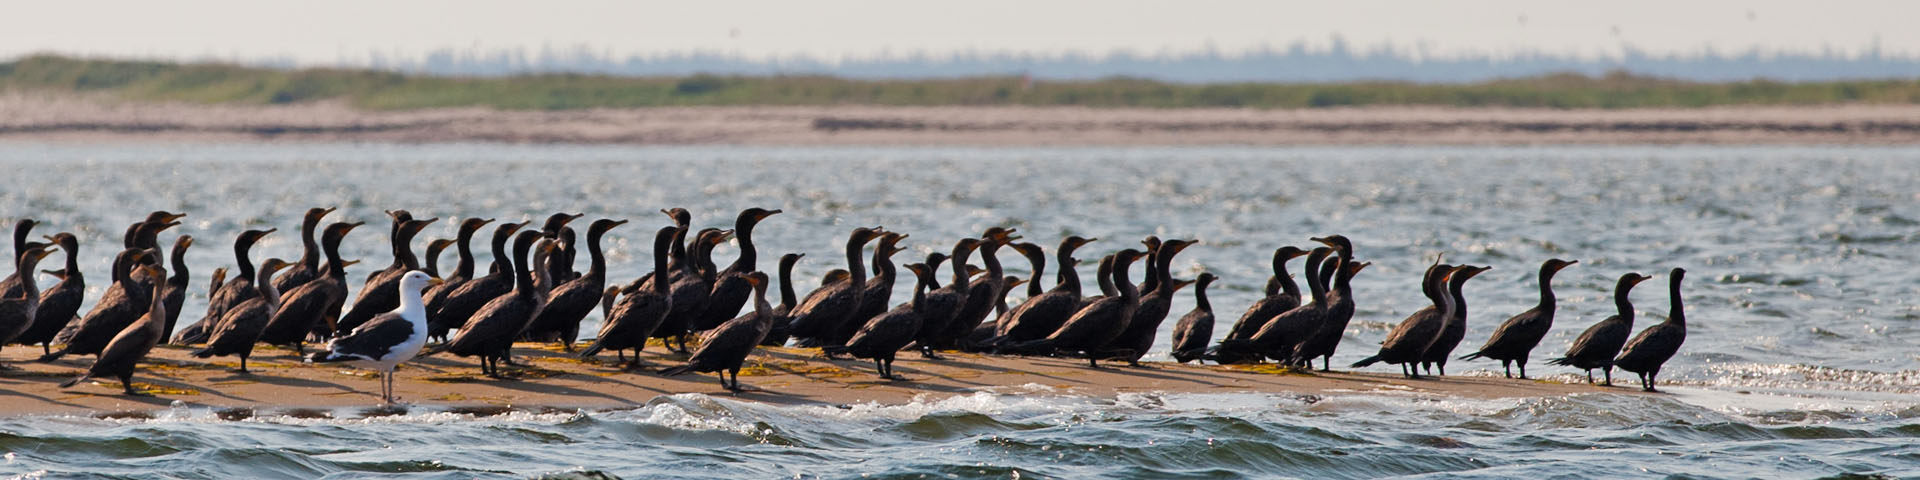 A large group of cormorants standing on a dune at the edge of the water.